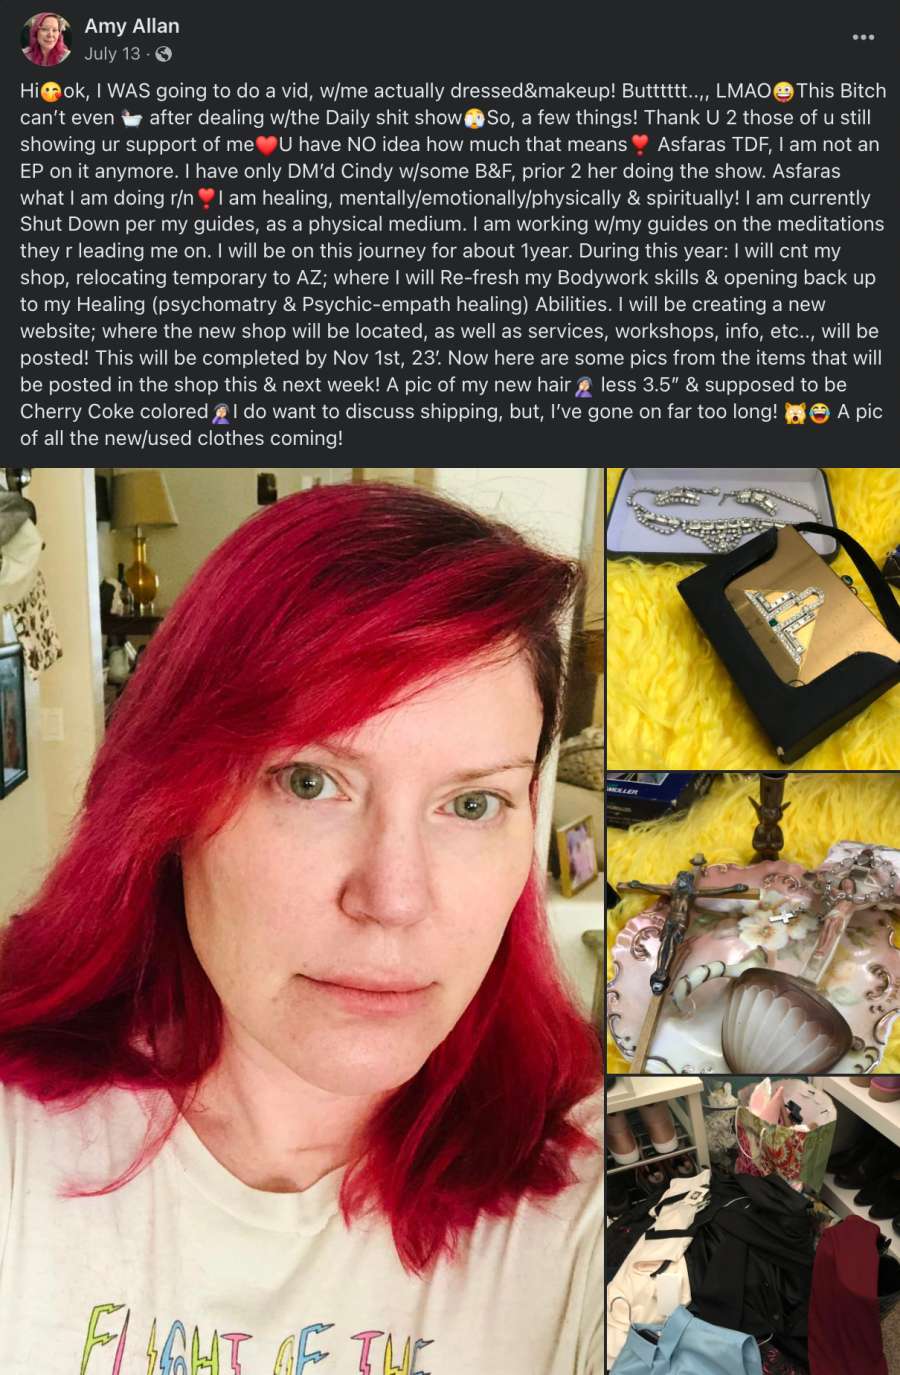 Image of Amy Allan post about her online brand